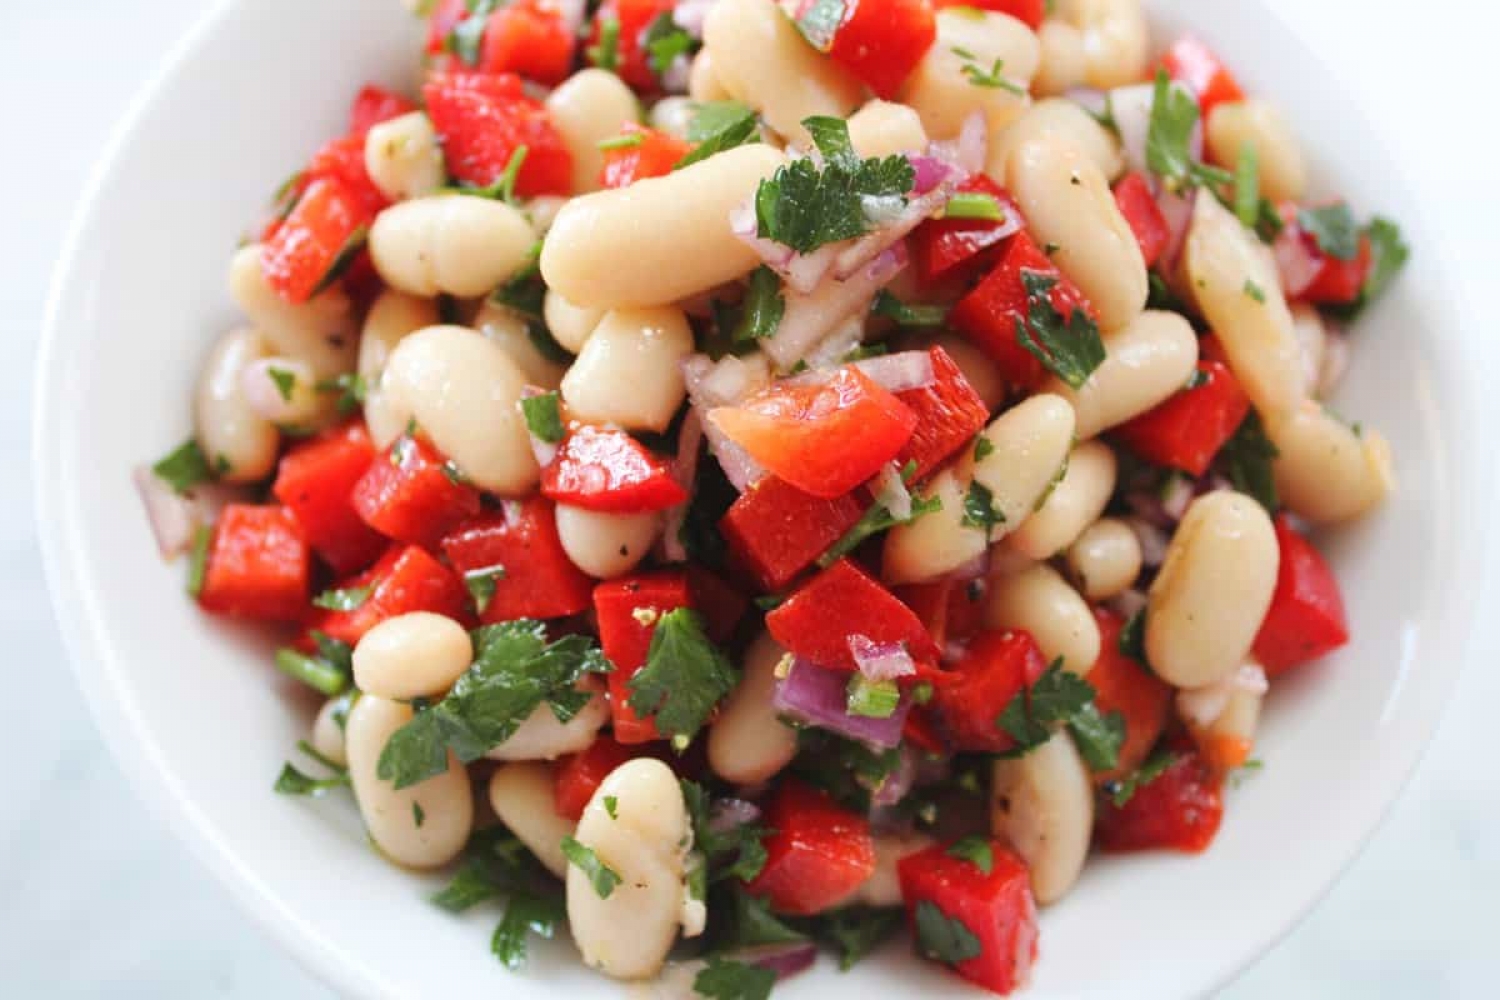 <p>Creamy cannellini beans meld beautifully with the citrusy, garlicky, herbaceous flavors in this refreshing salsa, combined with the crunch of bell peppers and red onion. It's a great healthy snack or side to enjoy for any occasion. <a href="https://itsnotcomplicatedrecipes.com/white-bean-salsa/" rel="noopener">Get the recipe here.</a></p>